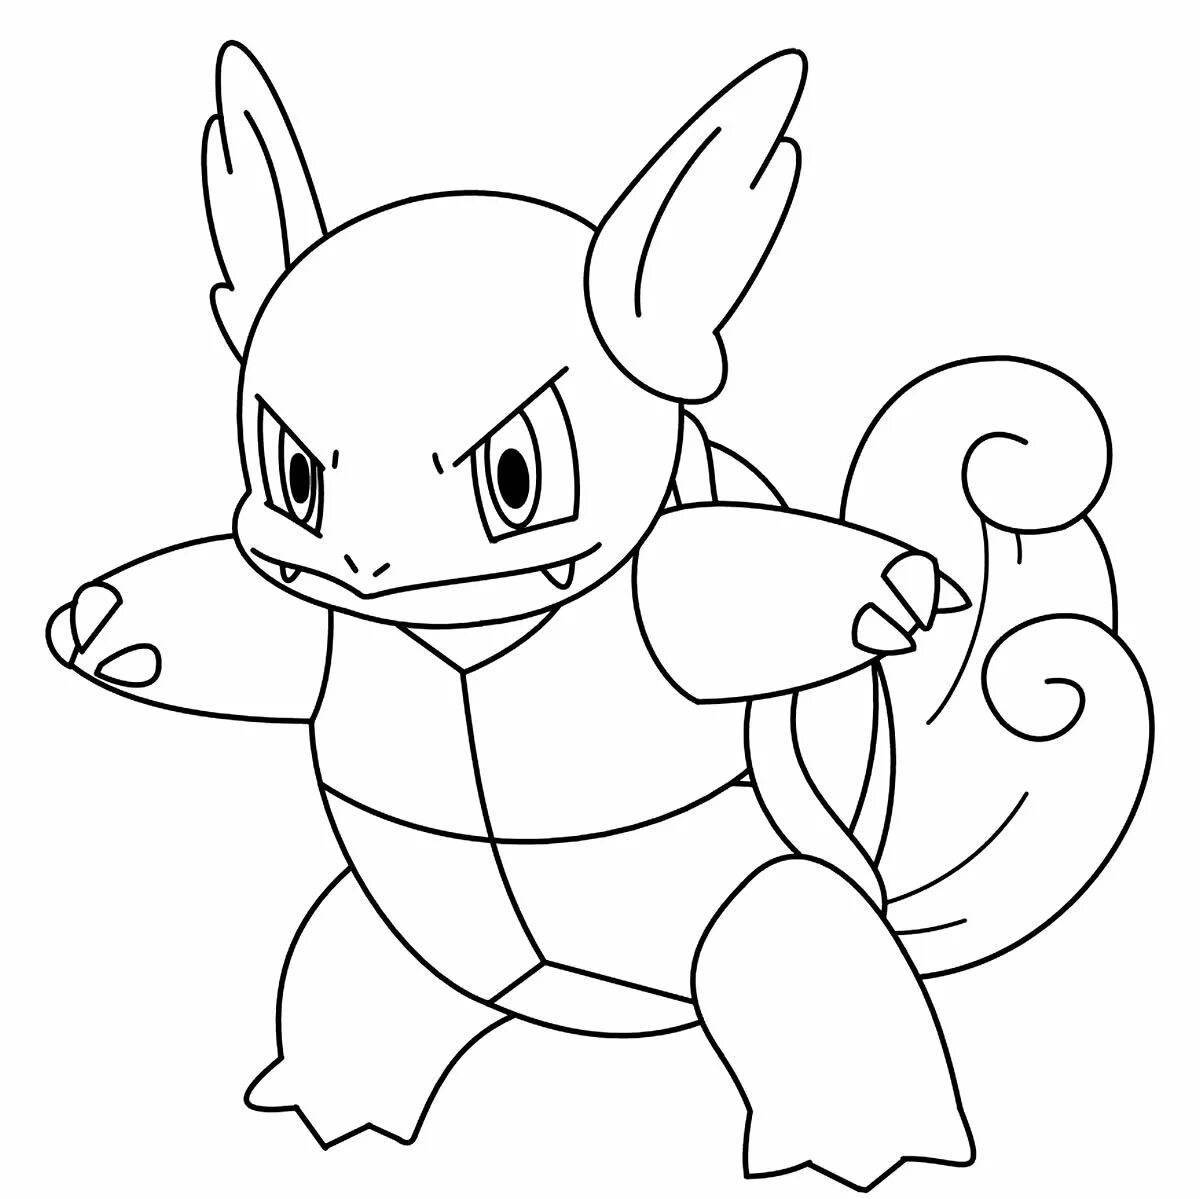 Glorious squirtle pokemon coloring page